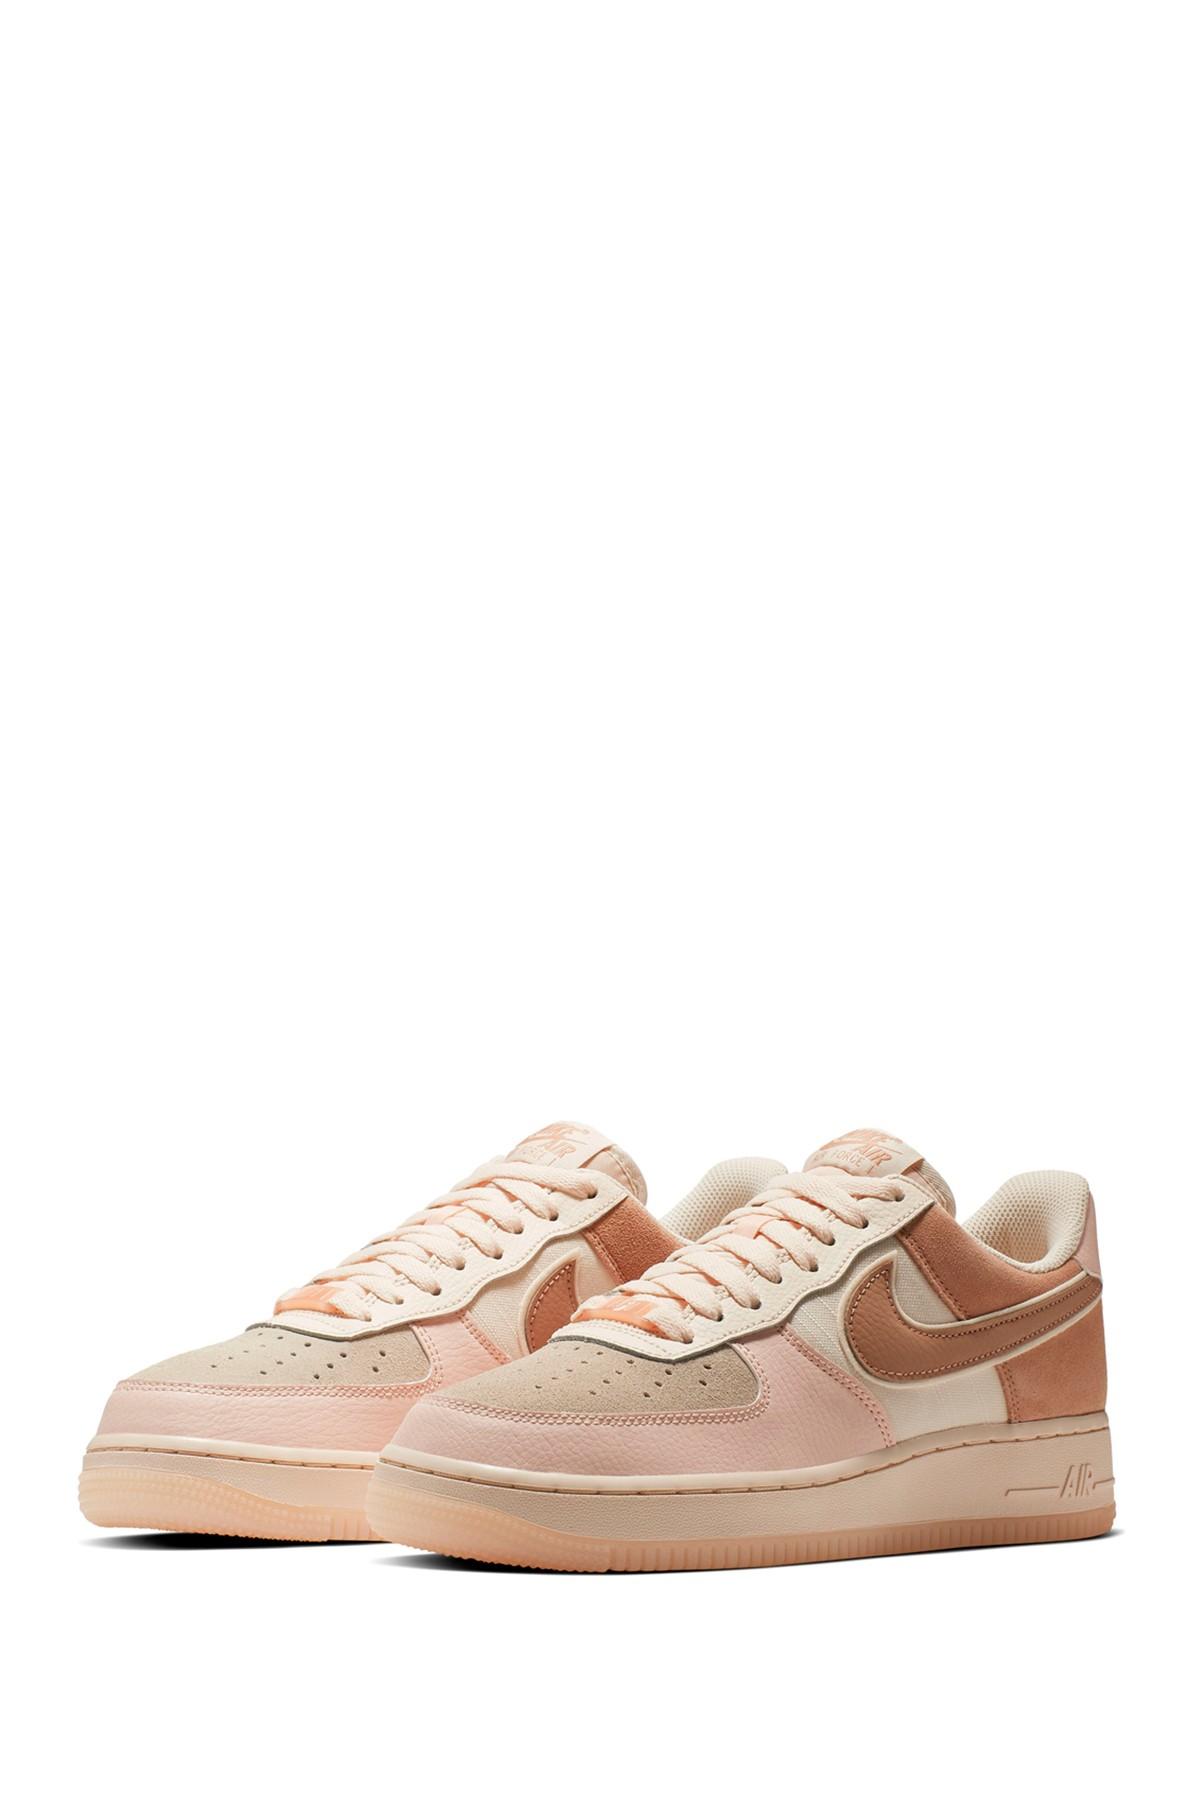 nike air force 1 low premium washed coral